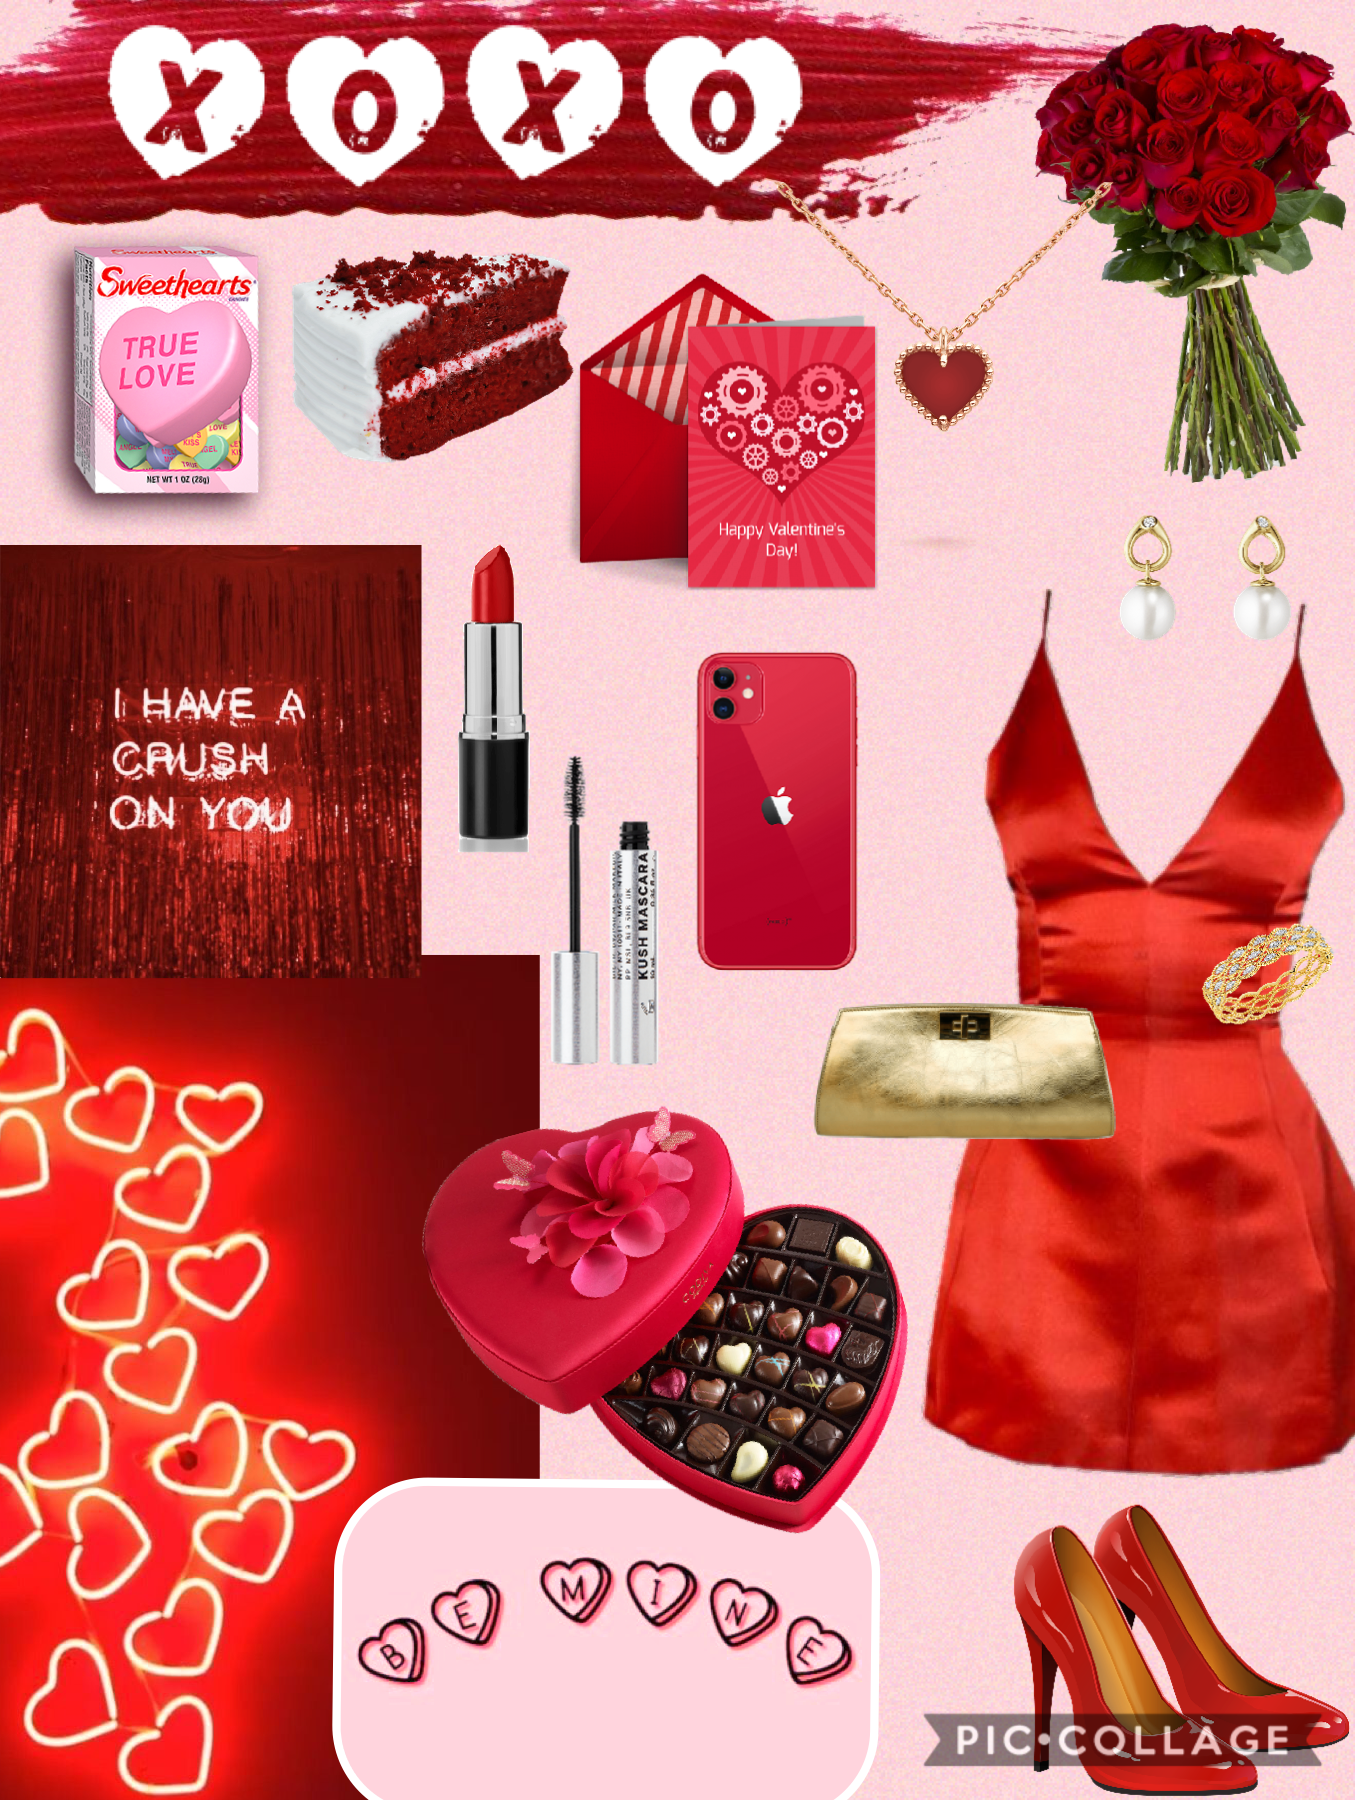 valentine’s day outfit🥰


 any likes or follows will be appreciated and returned with a follow and likes!

#fashion #style #outfit #red #pink #valentinesday #chocolate #love #collage #piccollage #crush #dress #hearts #candy #makeup #mascara #redlips #date